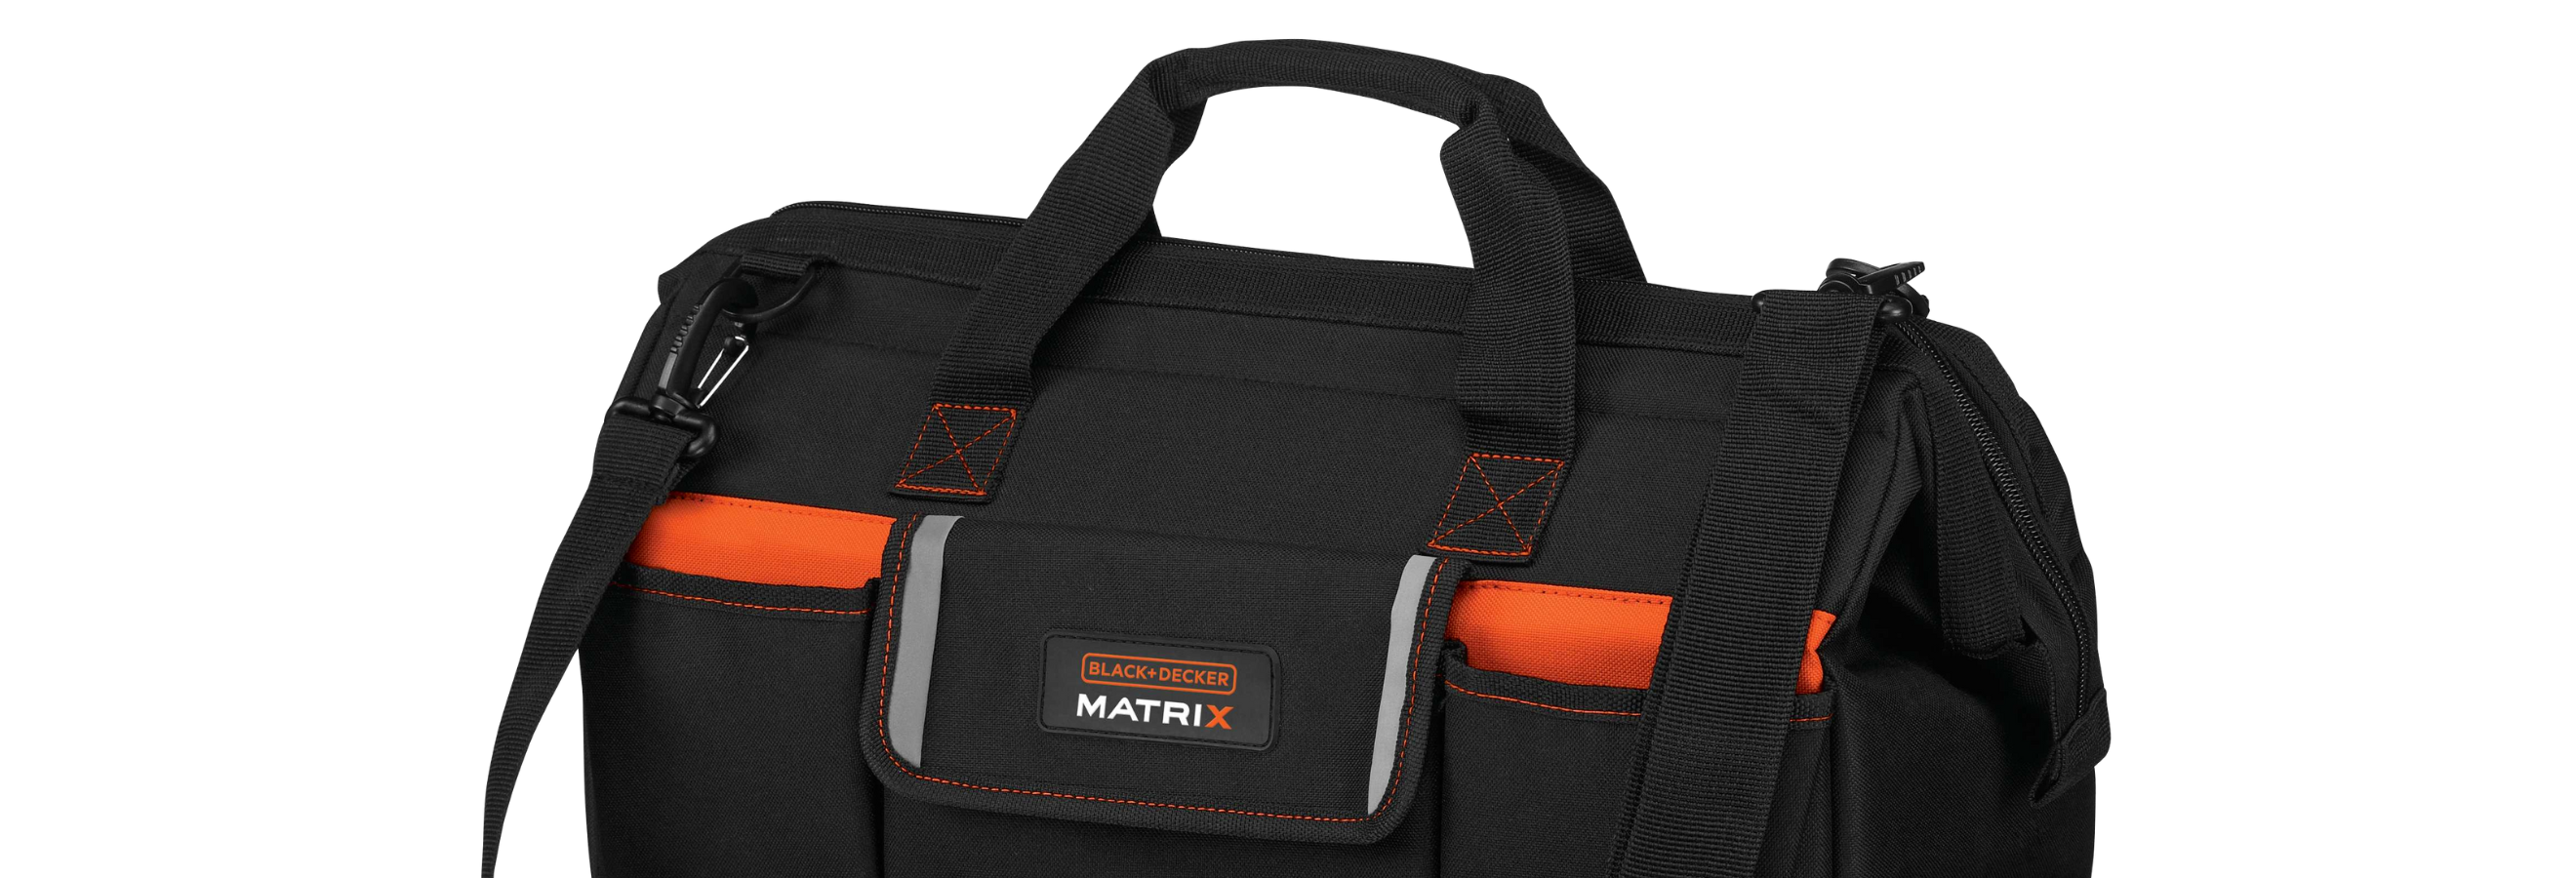 Tool Tote Bag For Matrix System, Wide-Mouth, 21-Inch